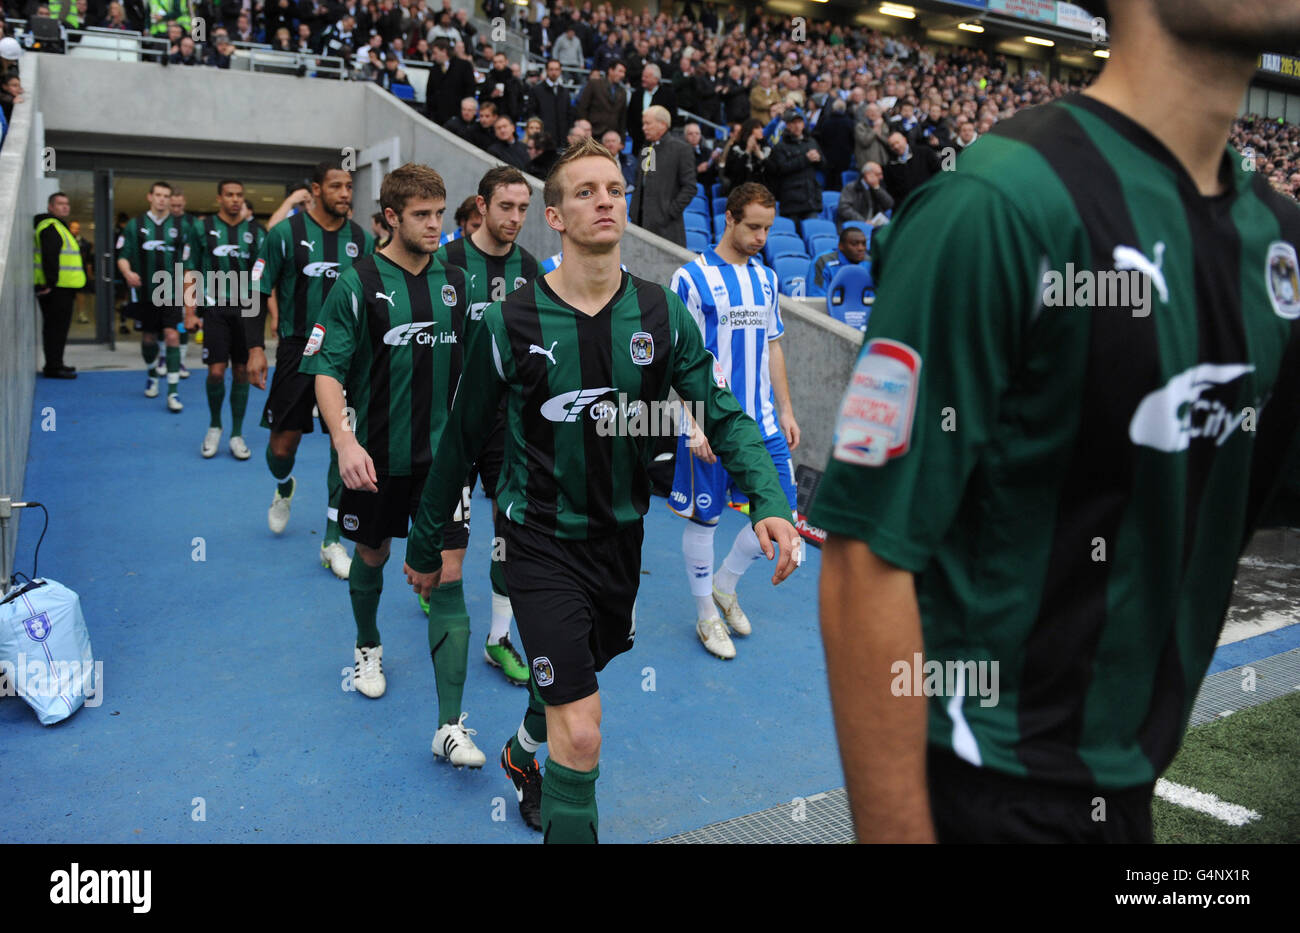 The players of Brighton & Hove Albion and Coventry City teams enter the pitch ahead of the npower Football League Championship match at the AMEX Stadium, Brighton. Stock Photo